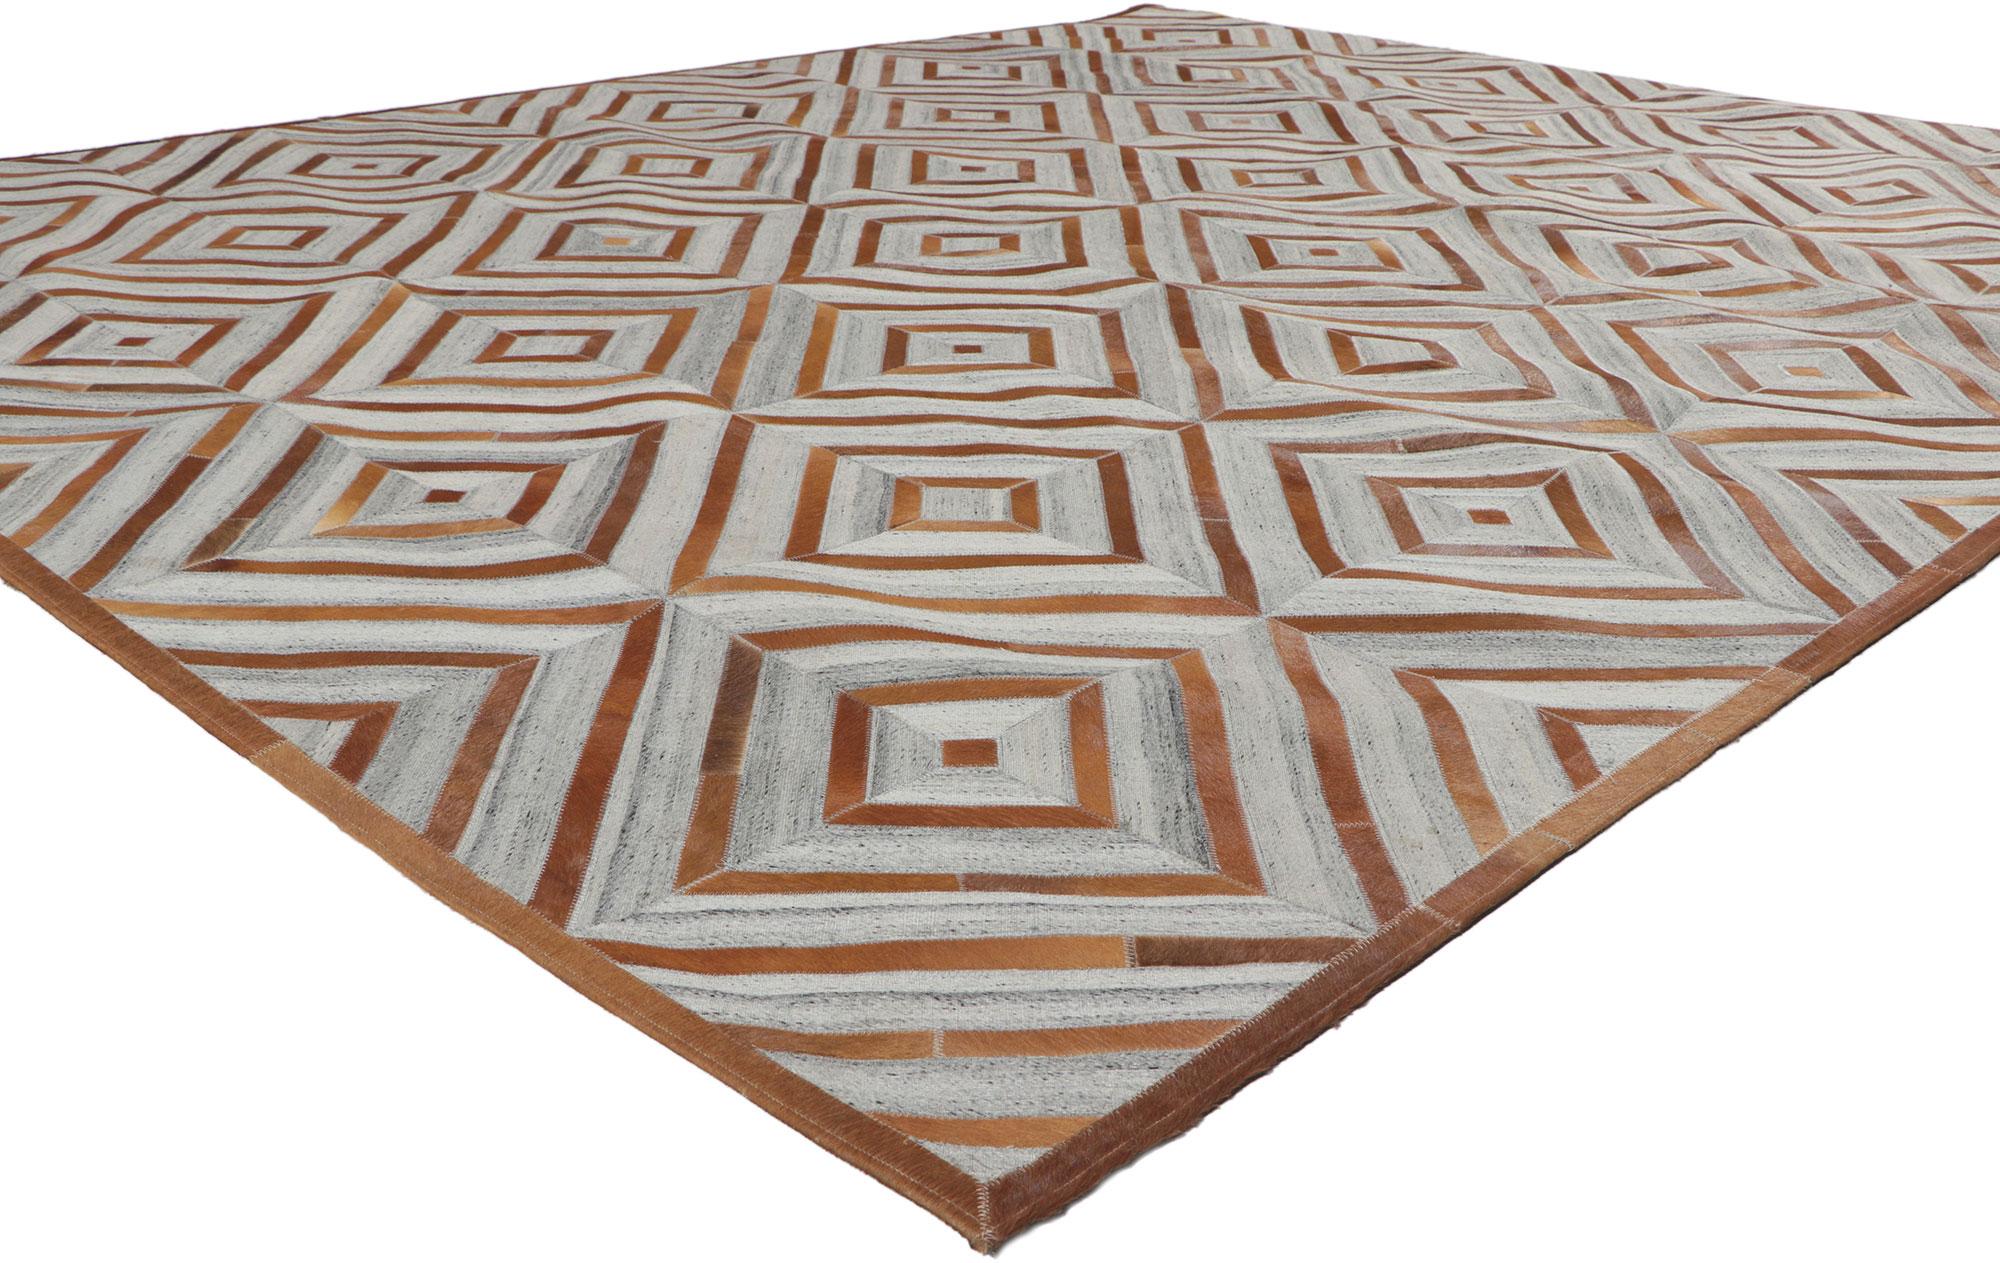 30914 New Cowhide Patchwork Rug, 08'00 x 09'11. ​Call the wild indoors and bring a sense of adventure home with this handcrafted cowhide rug. Showcasing a modern design, incredible detail and texture, this leather cowhide rug is a captivating vision